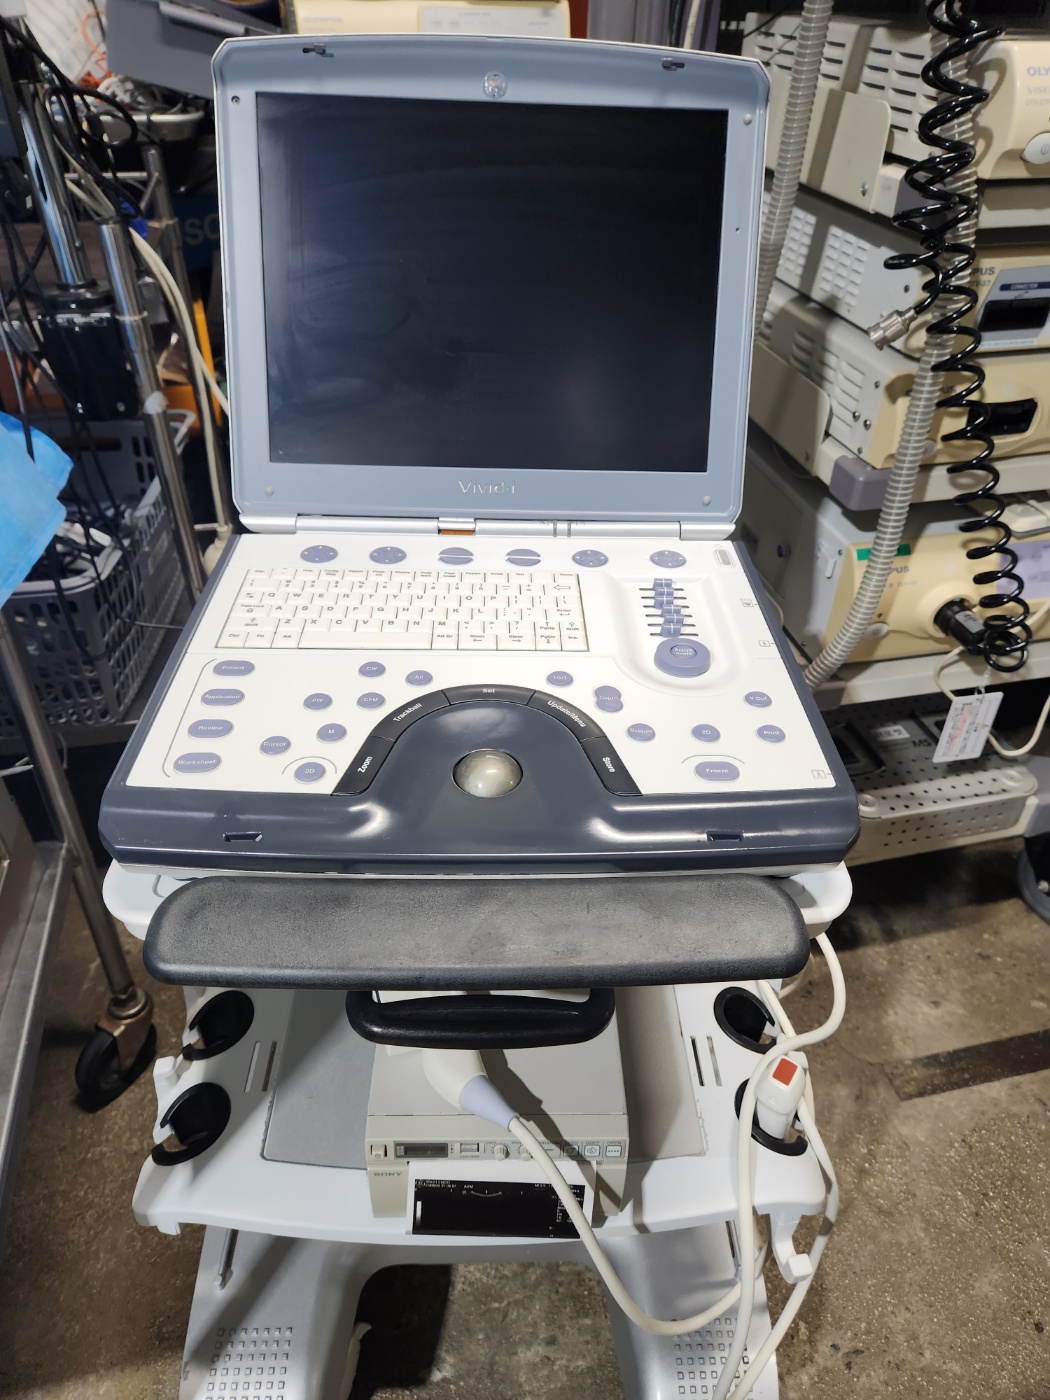 GE Vivid i Portable Ultrasound With 2 Probes